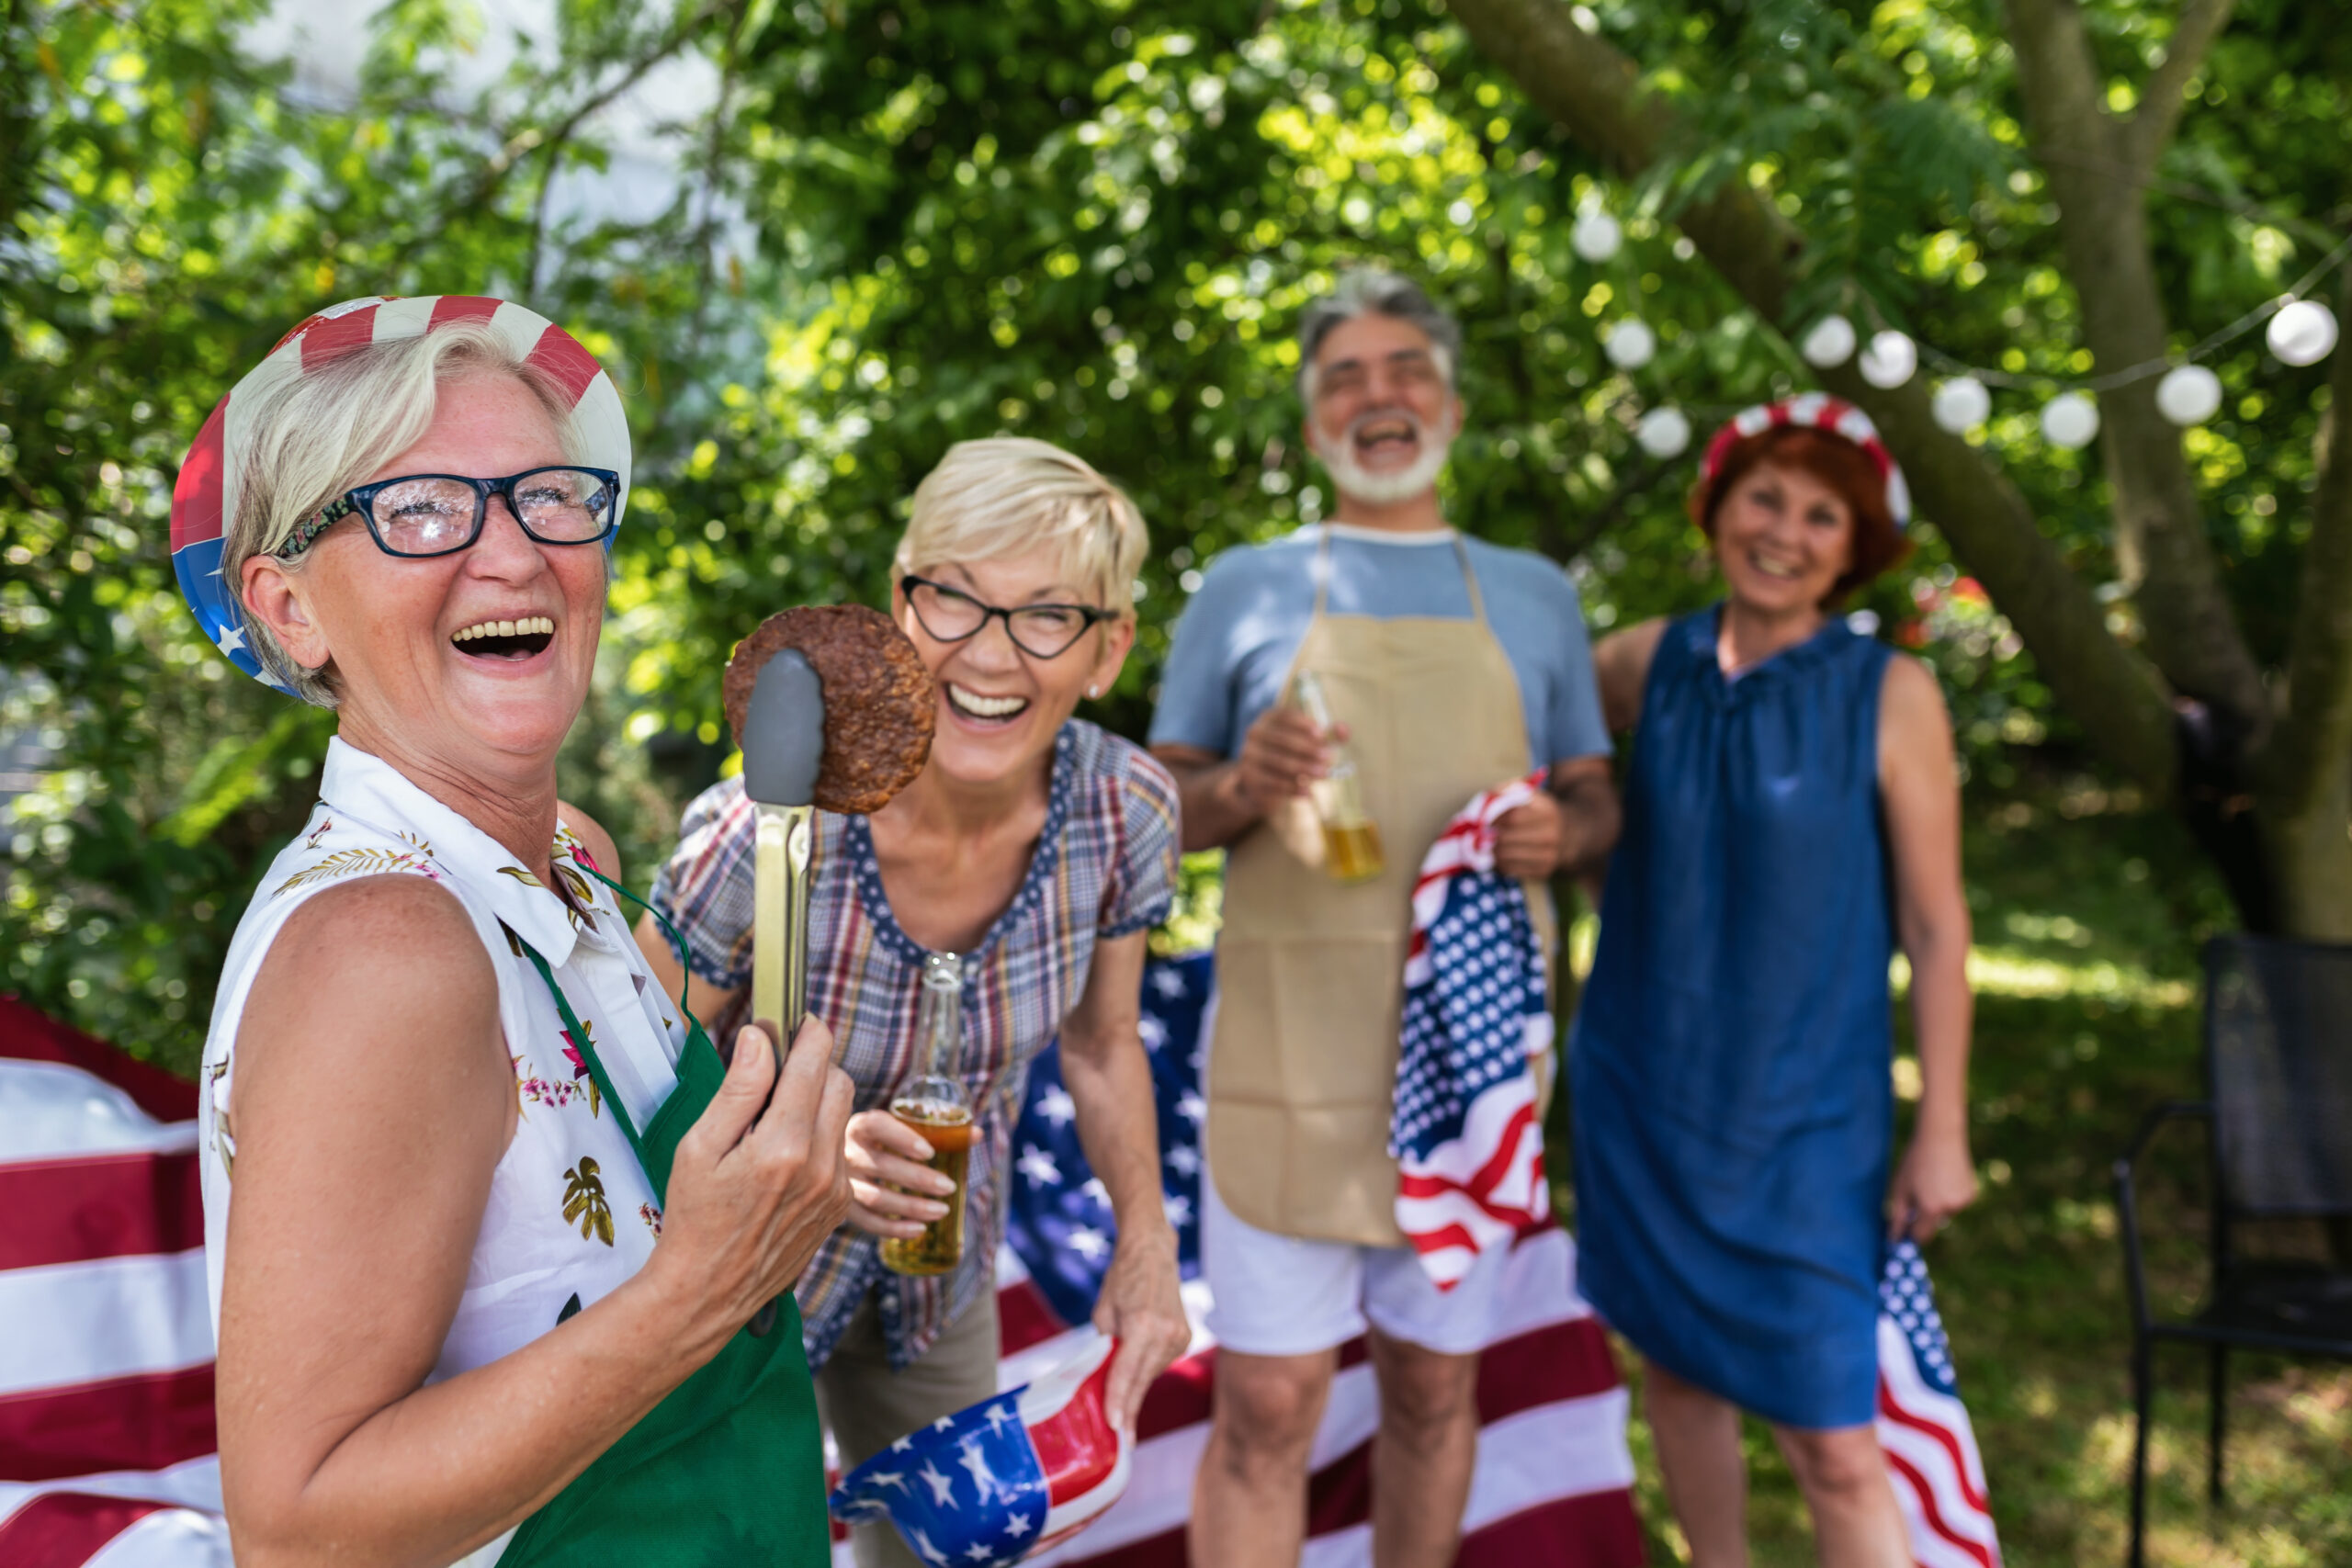 A group of elderly folks grill burgers and celebrate independence day.